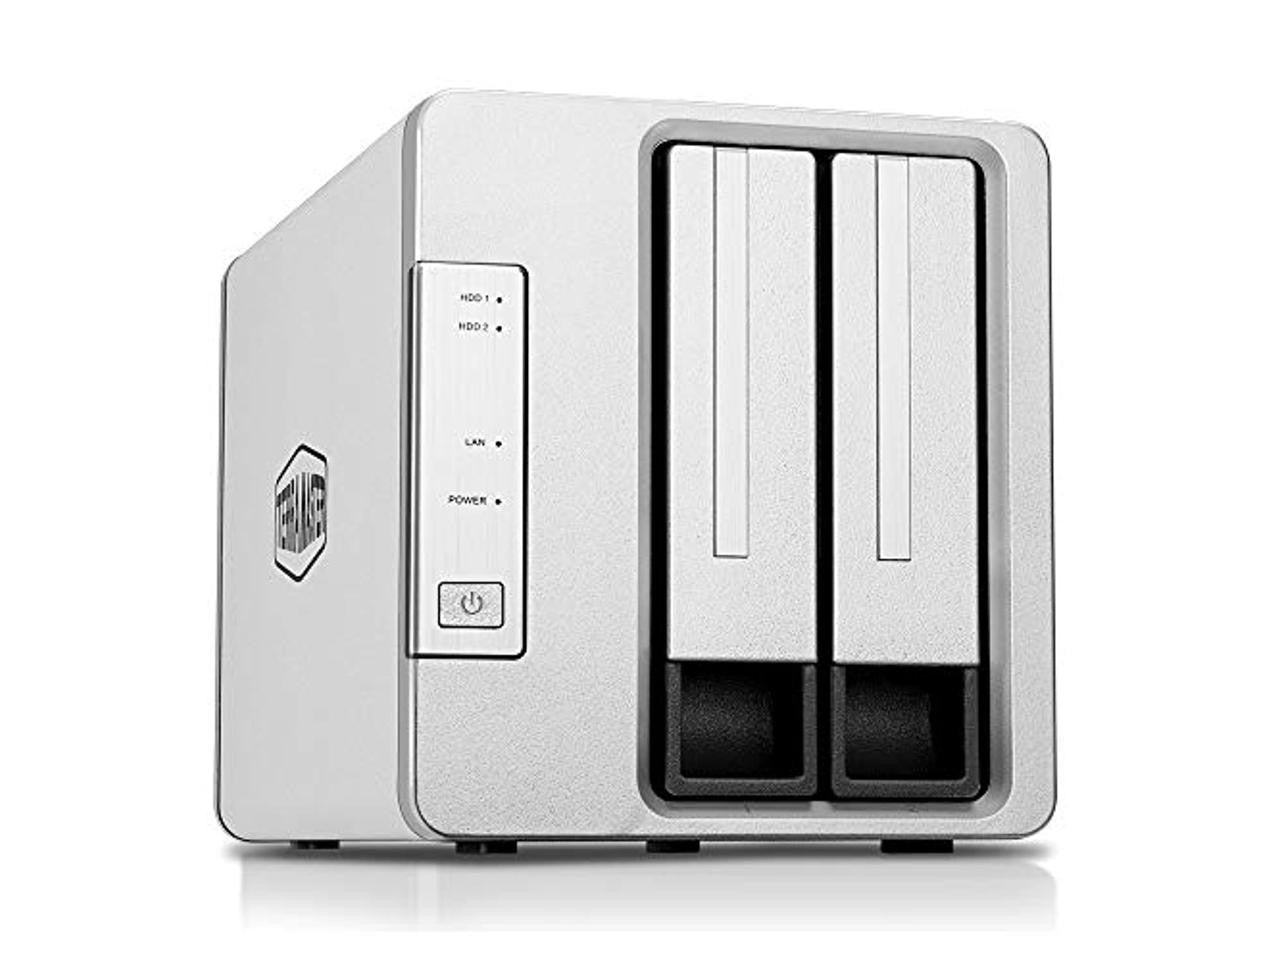 TerraMaster F2-210 2-Bay Home NAS with 20TB (2 x 10TB) of Seagate Ironwolf NAS Drives Fully Assembled and Tested